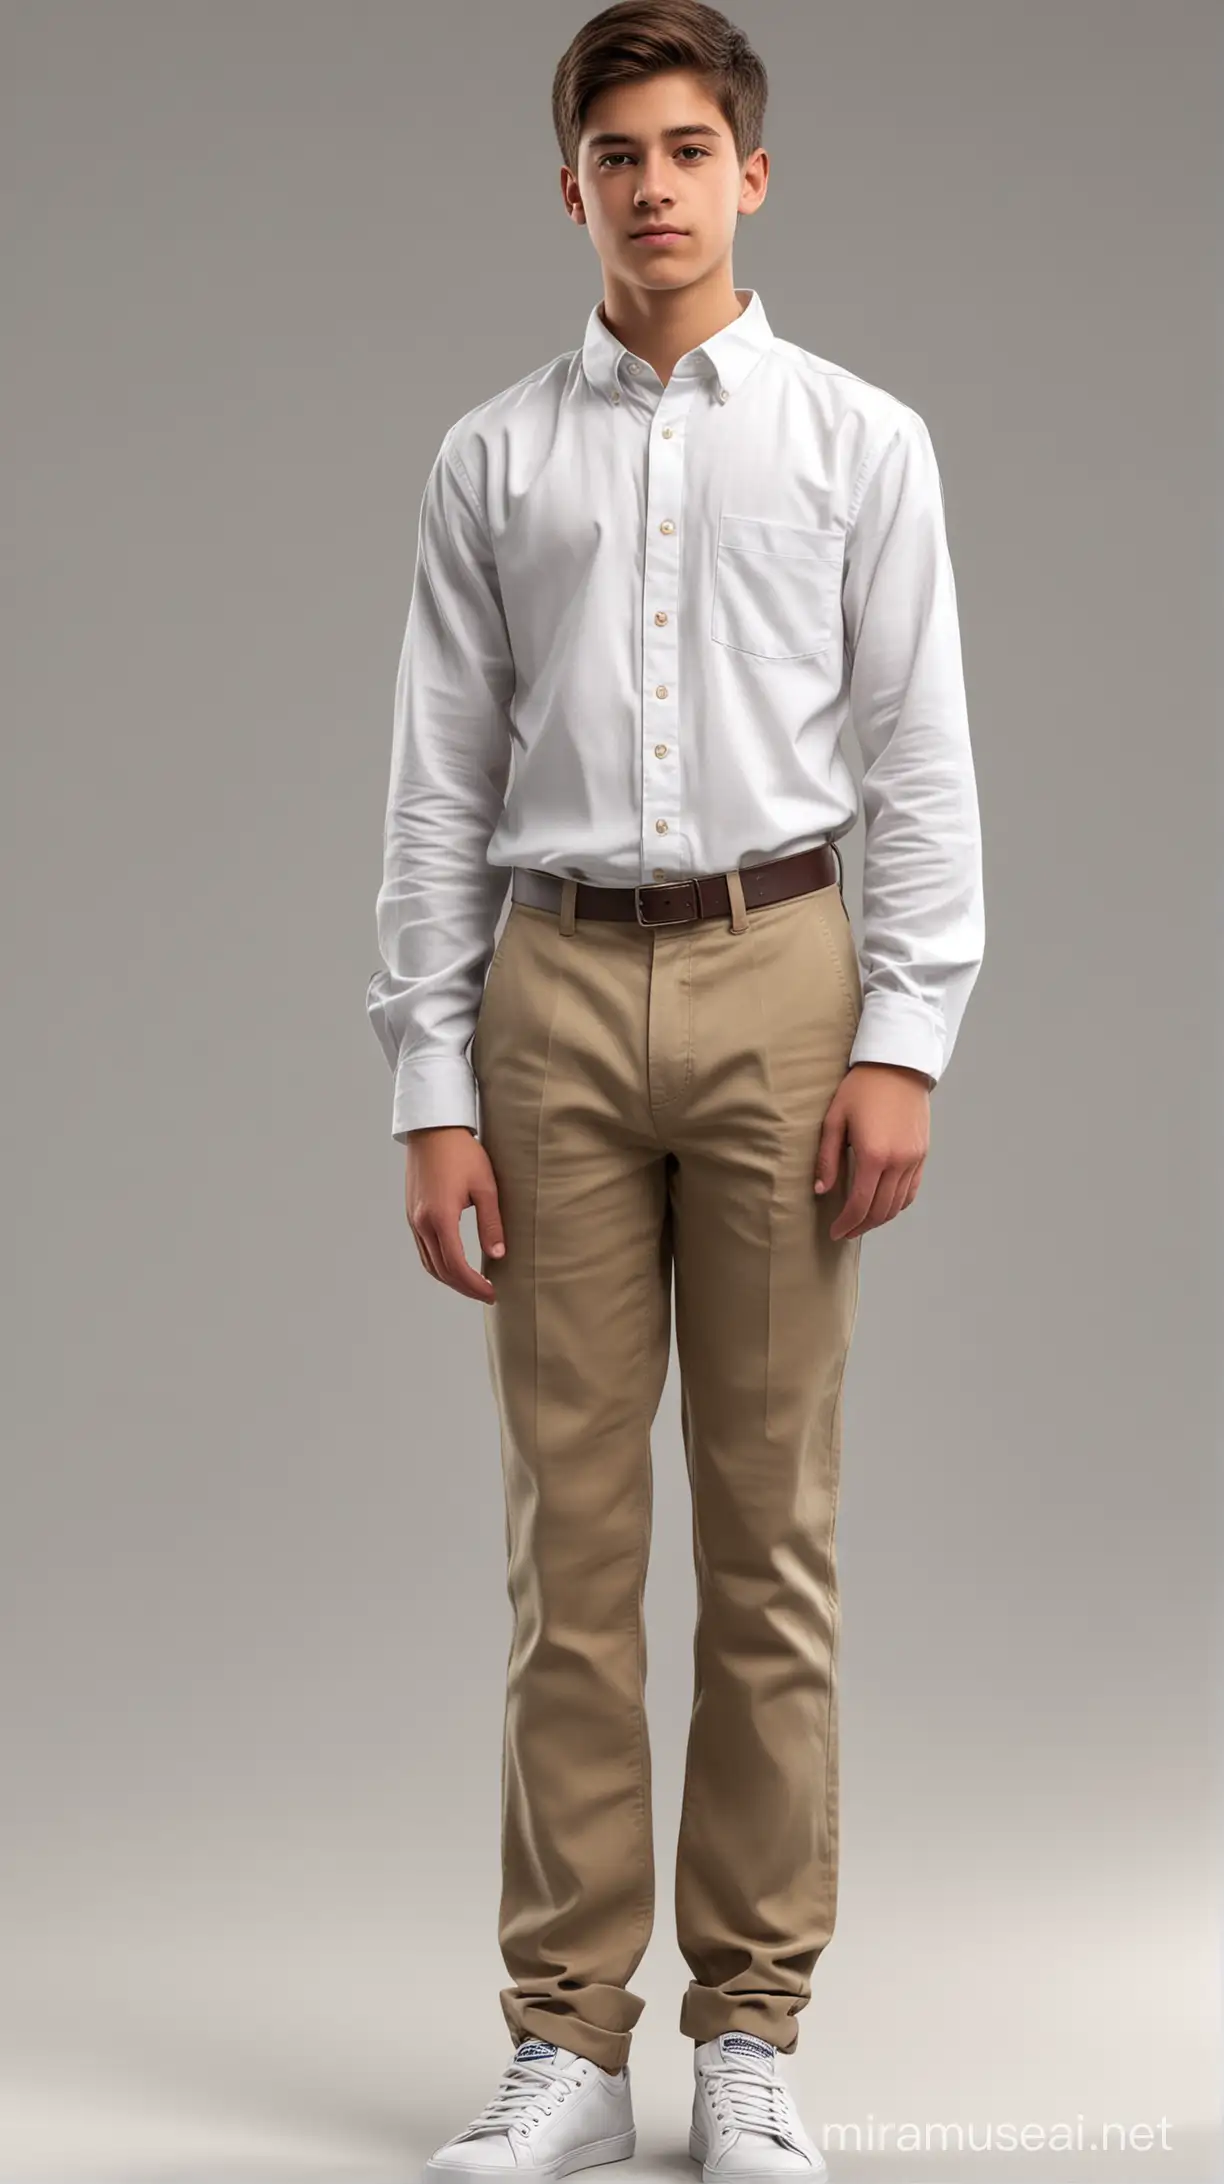 Young adult A-level school boy standing straight on a side pose wearing a full sleeve white shirt and khaki school pants, realistic, thin, teenage, handsome, full image, full shot, full-body.